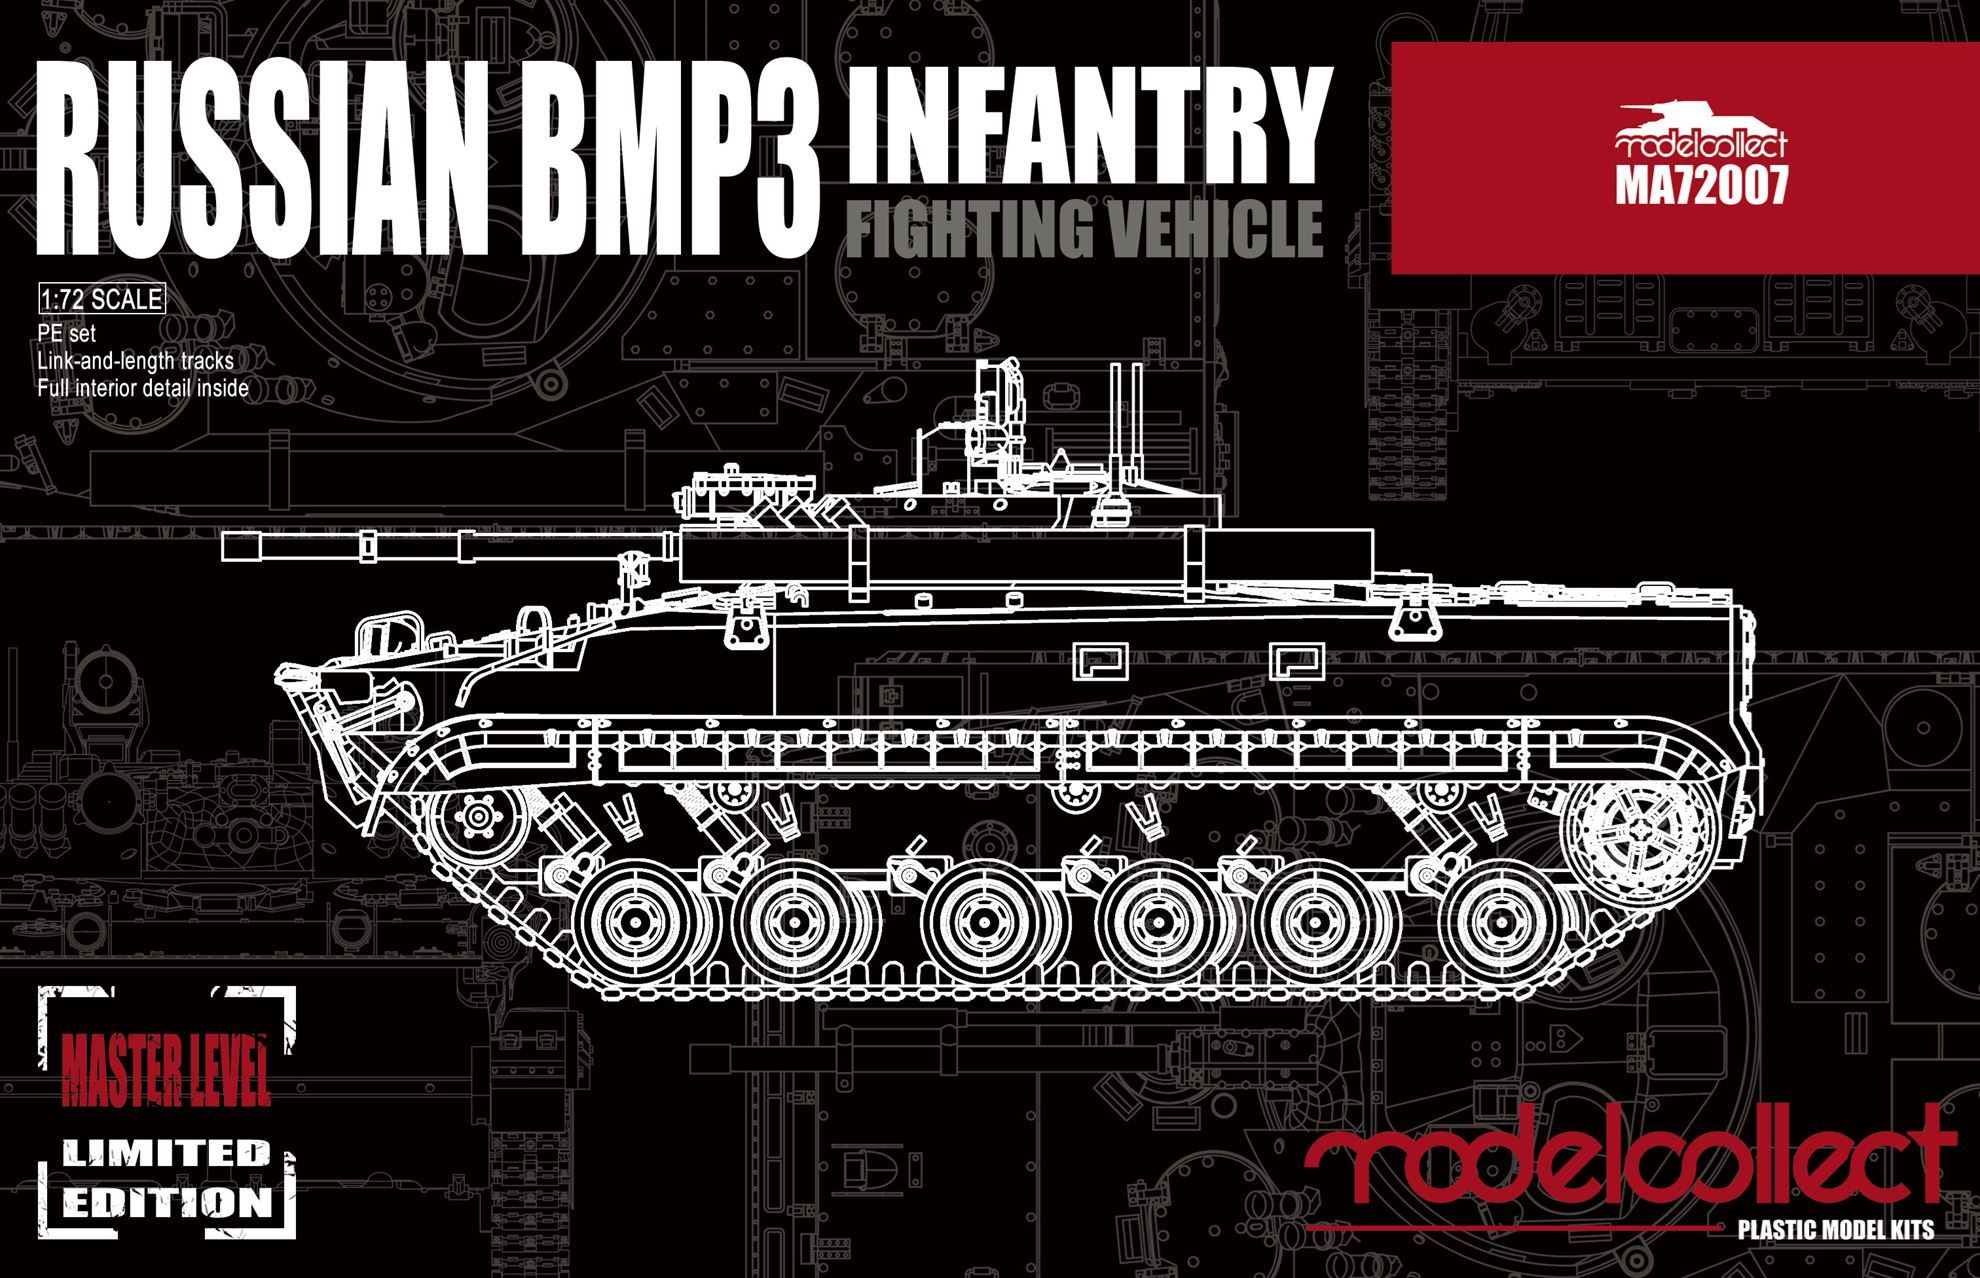 Russian BMP3 Infantry Fighting Vehicle